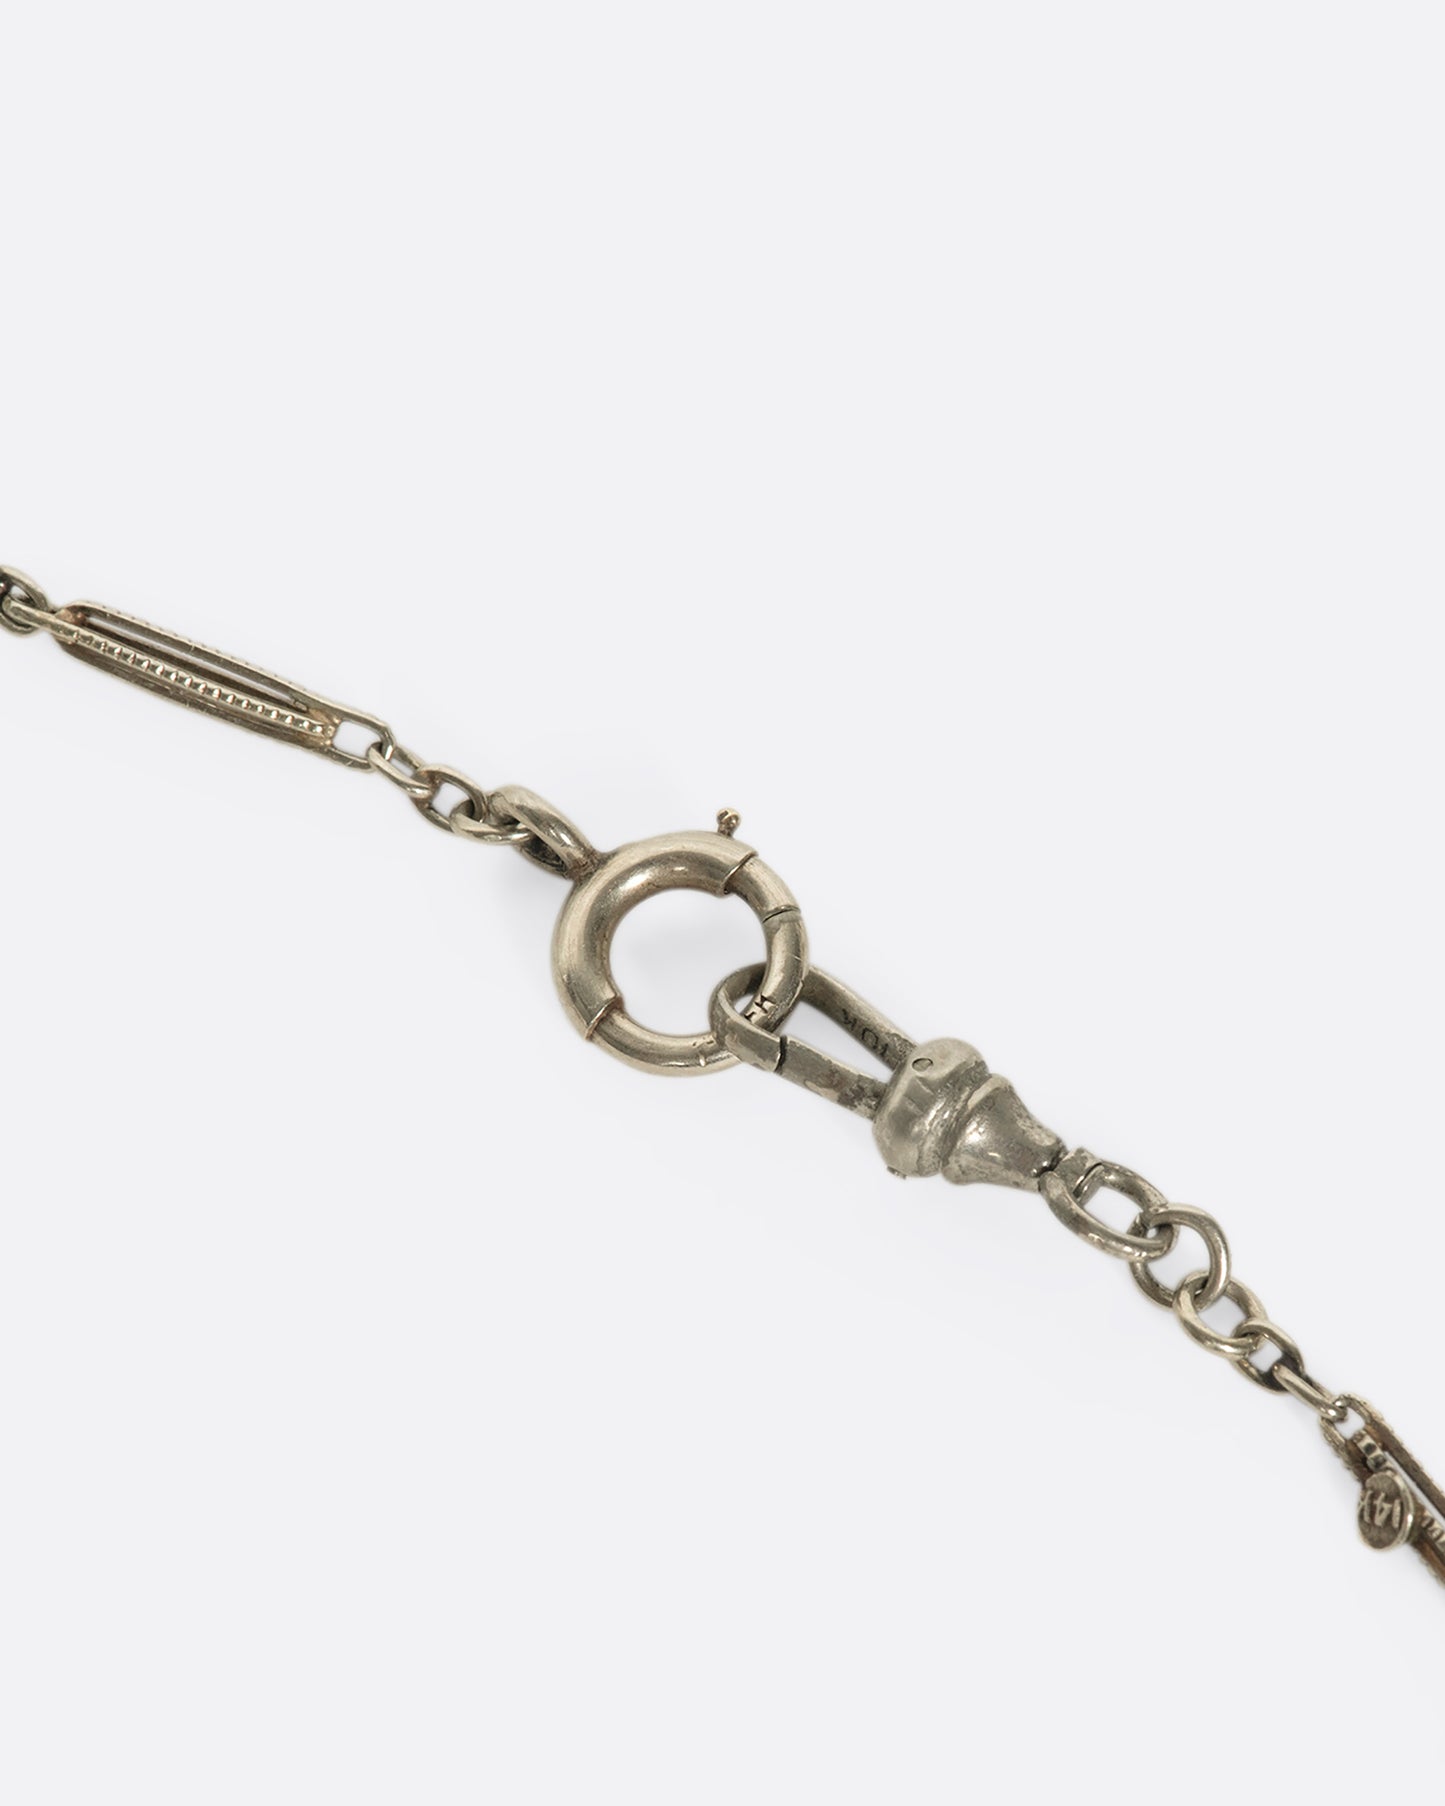 A close up of a white gold chain necklace clasp.